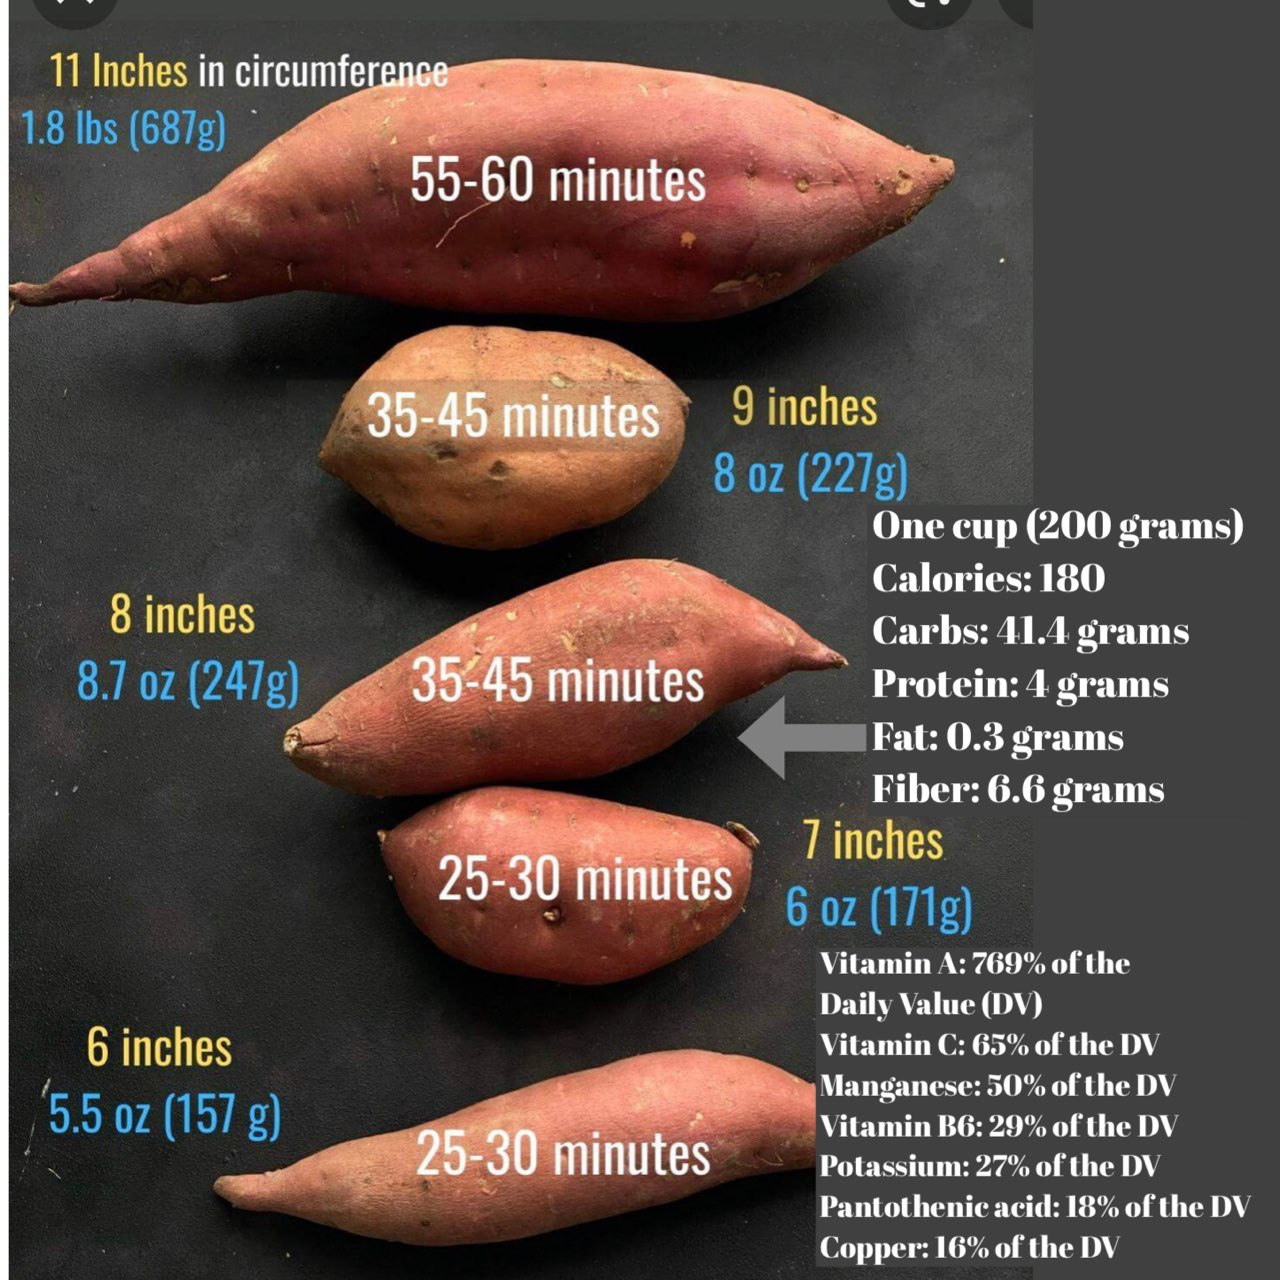 Mastering The Art Of Baking A Delicious Sweet Potato: A Step-by-Step Guide